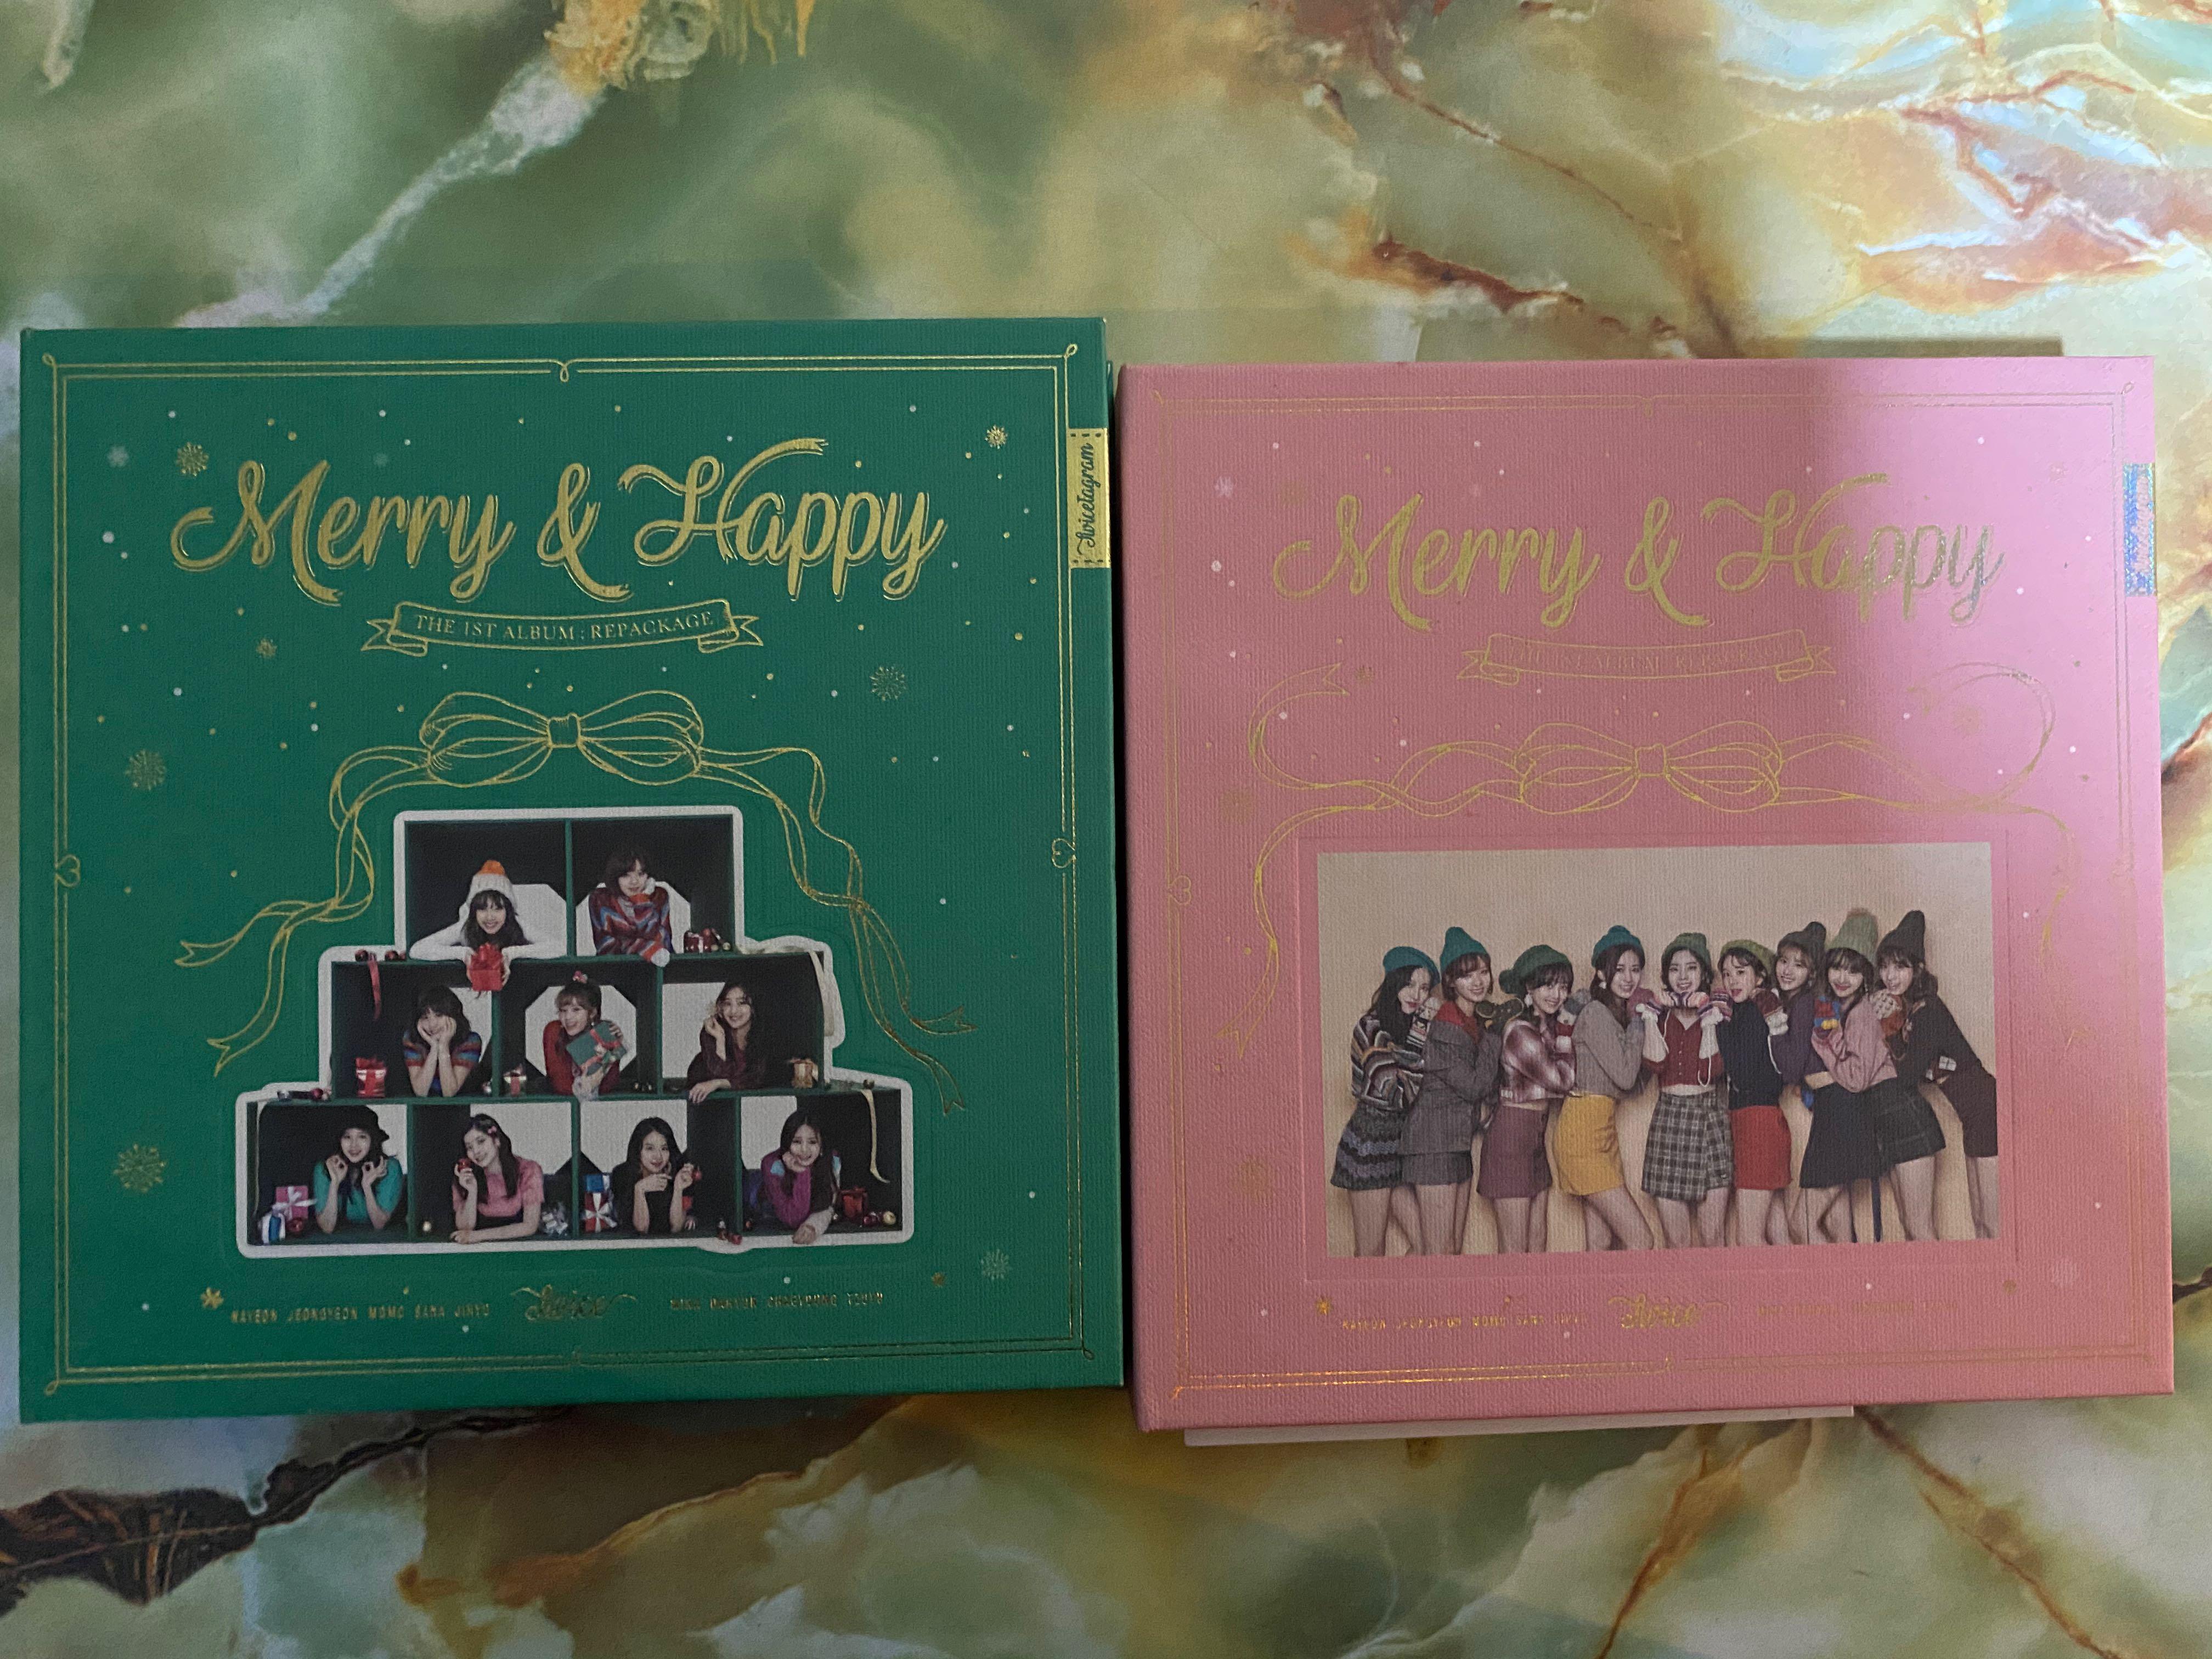 Wts Twice Merry And Happy Album Hobbies Toys Memorabilia Collectibles K Wave On Carousell